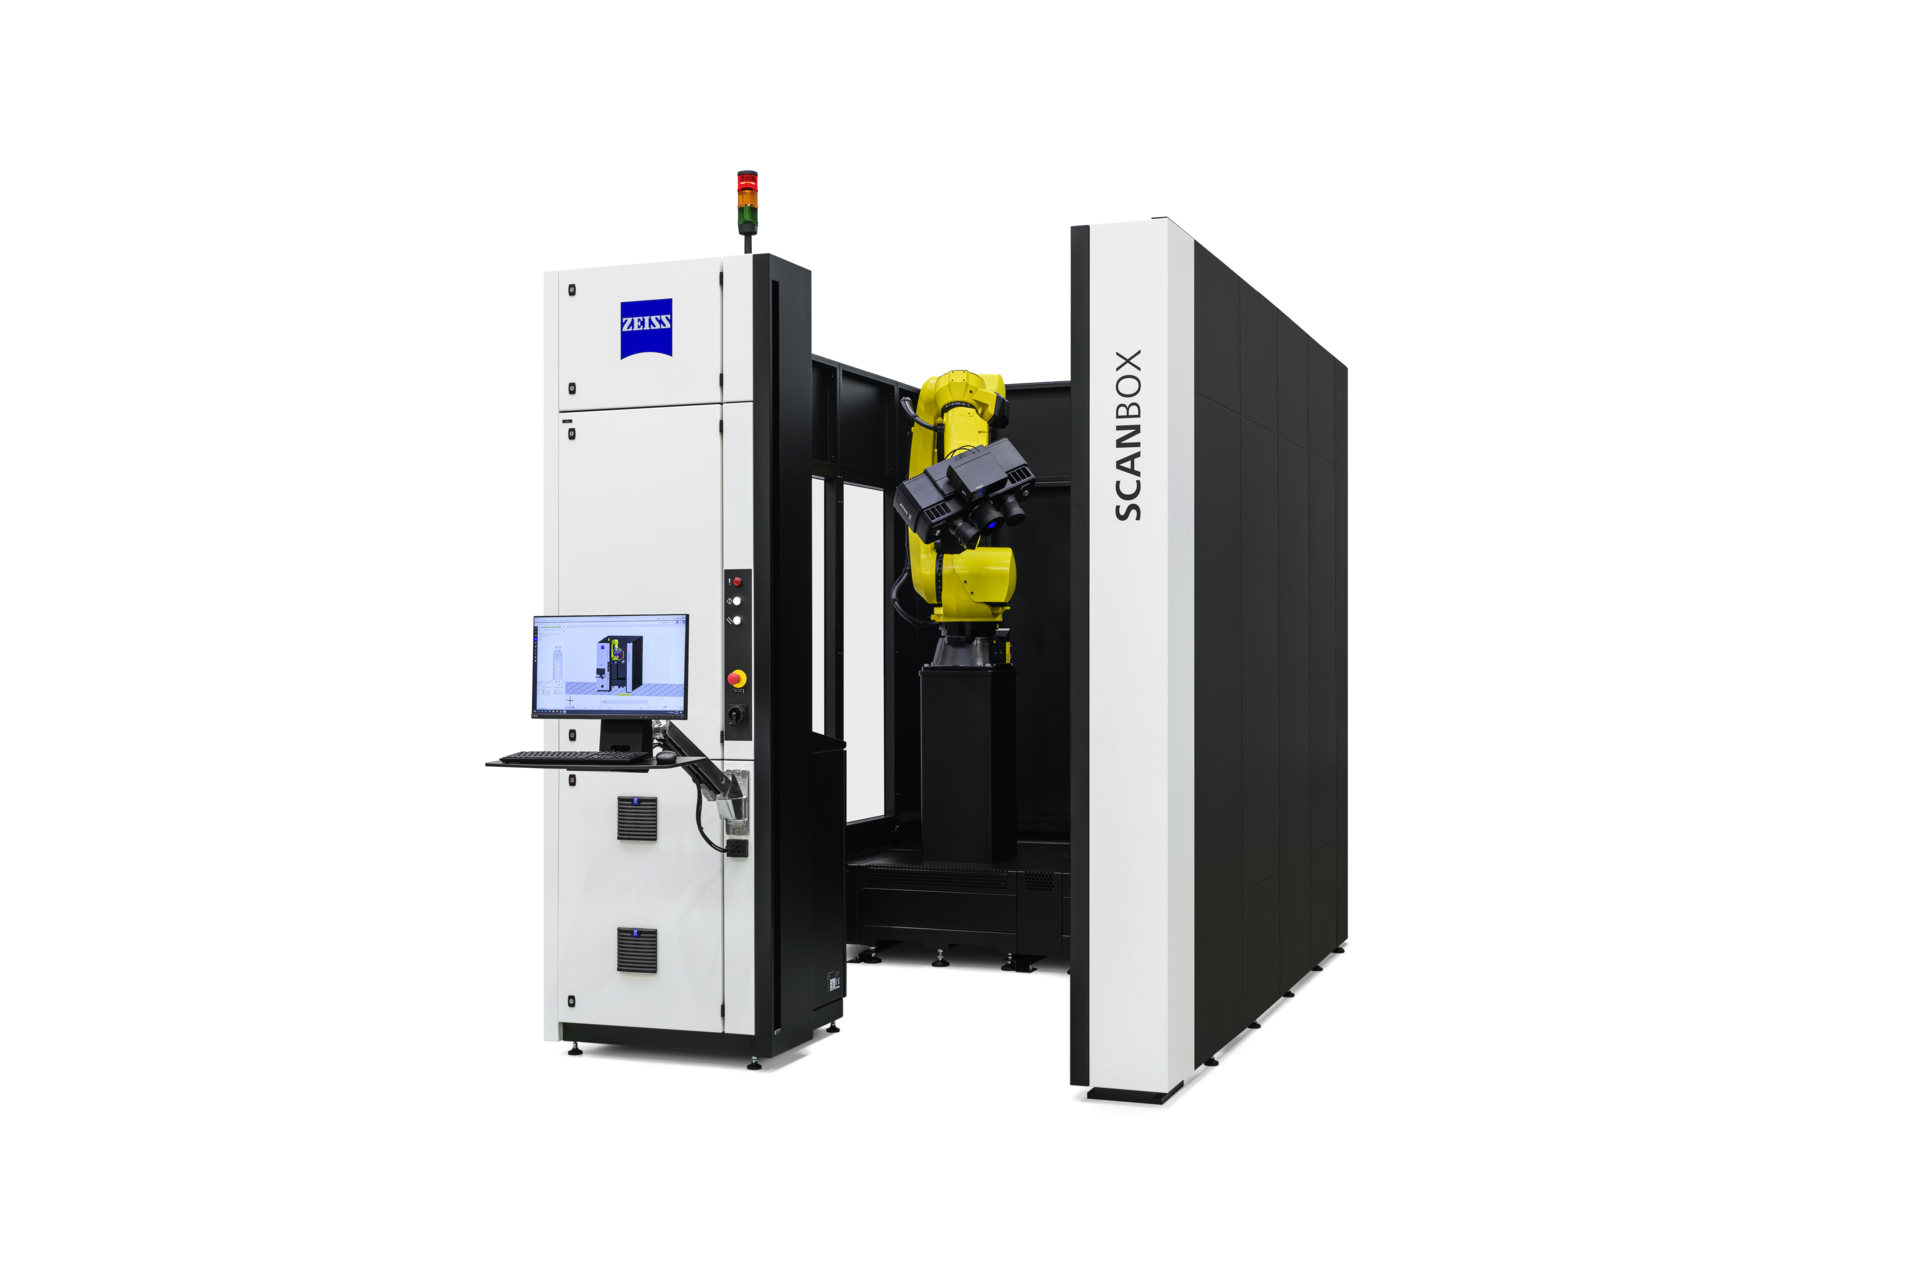 zeiss scanbox 5110 automated 3D scanning for small parts